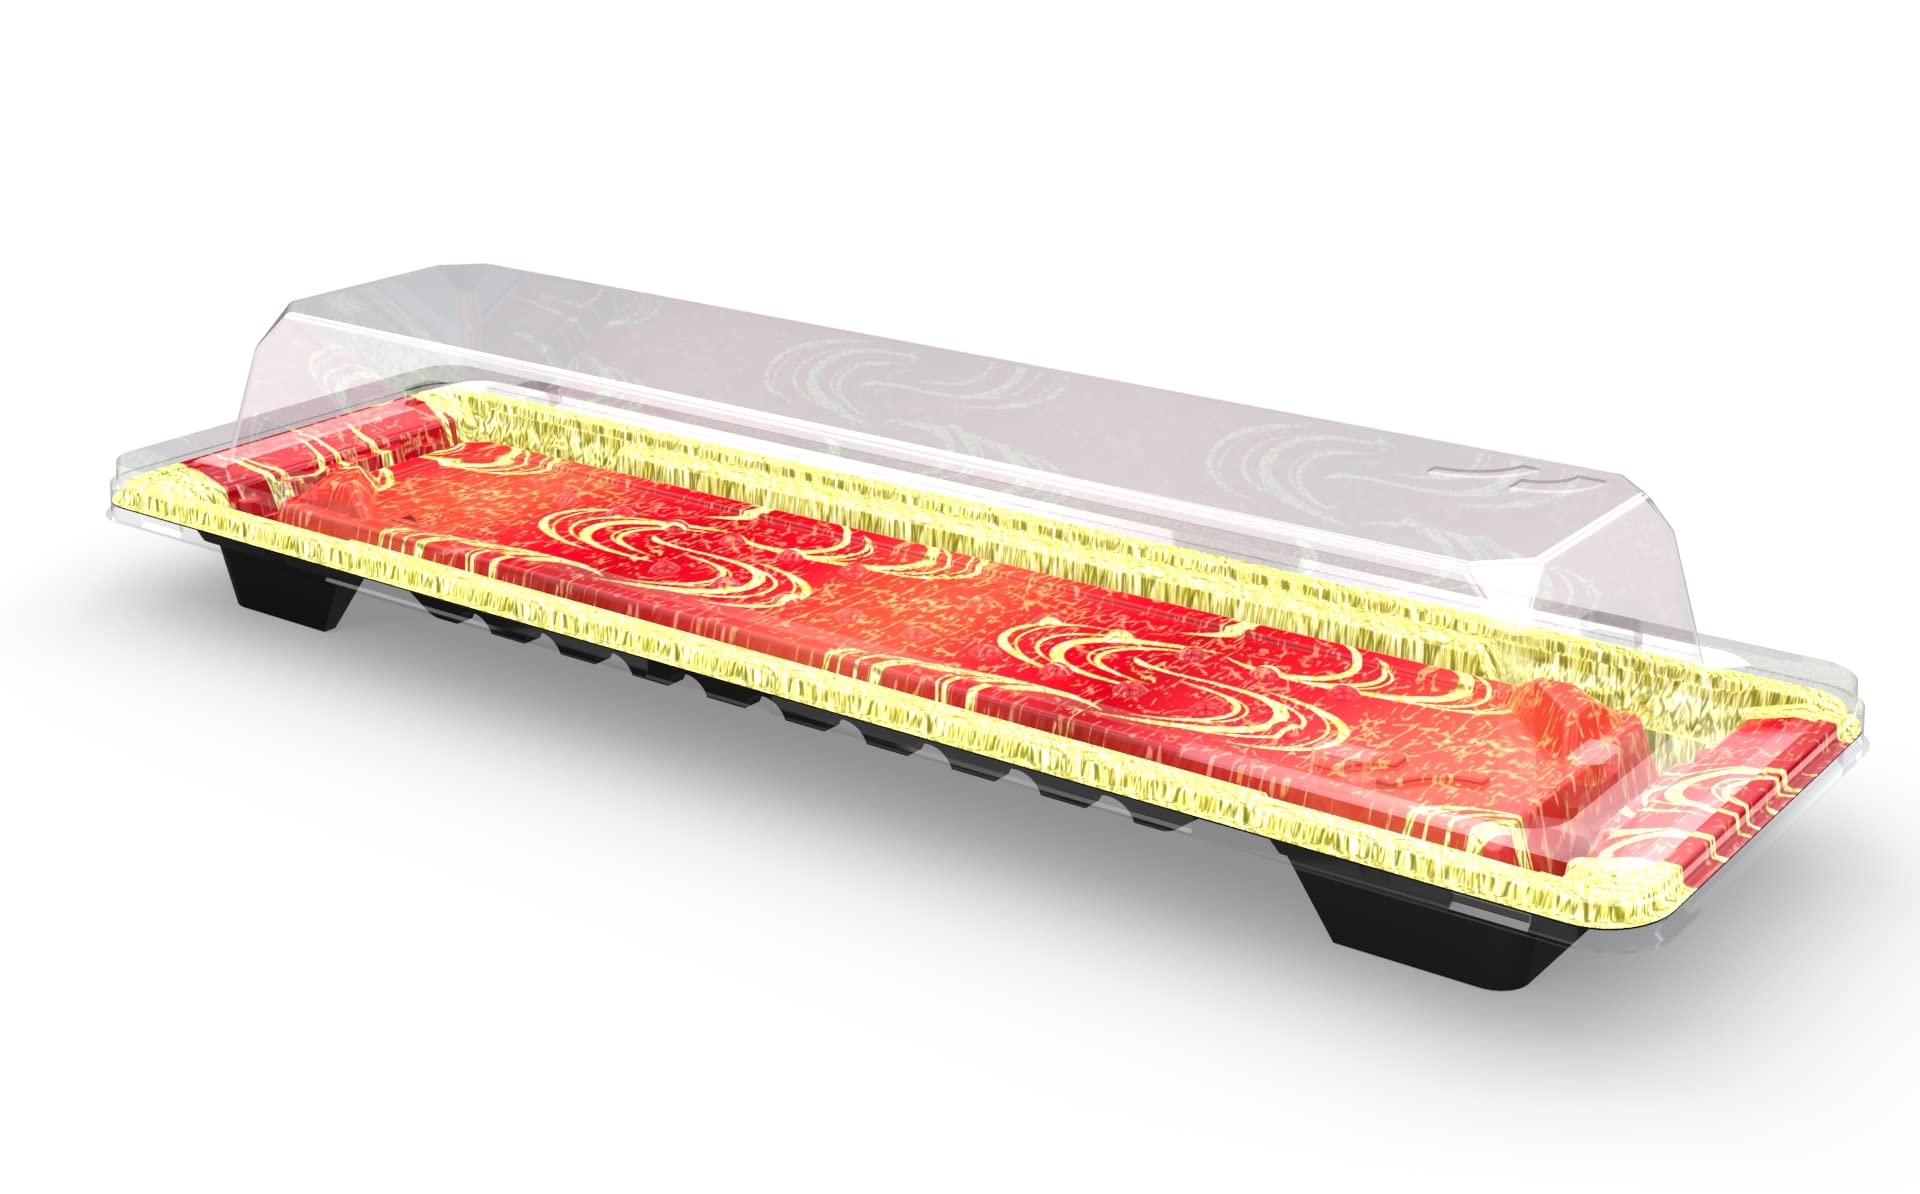 SEABOOM Sushi Container Sushi Tray Sushi Plate Sushi display 13x4-Inch Takeout Container With Clear Lid 200 sets RED